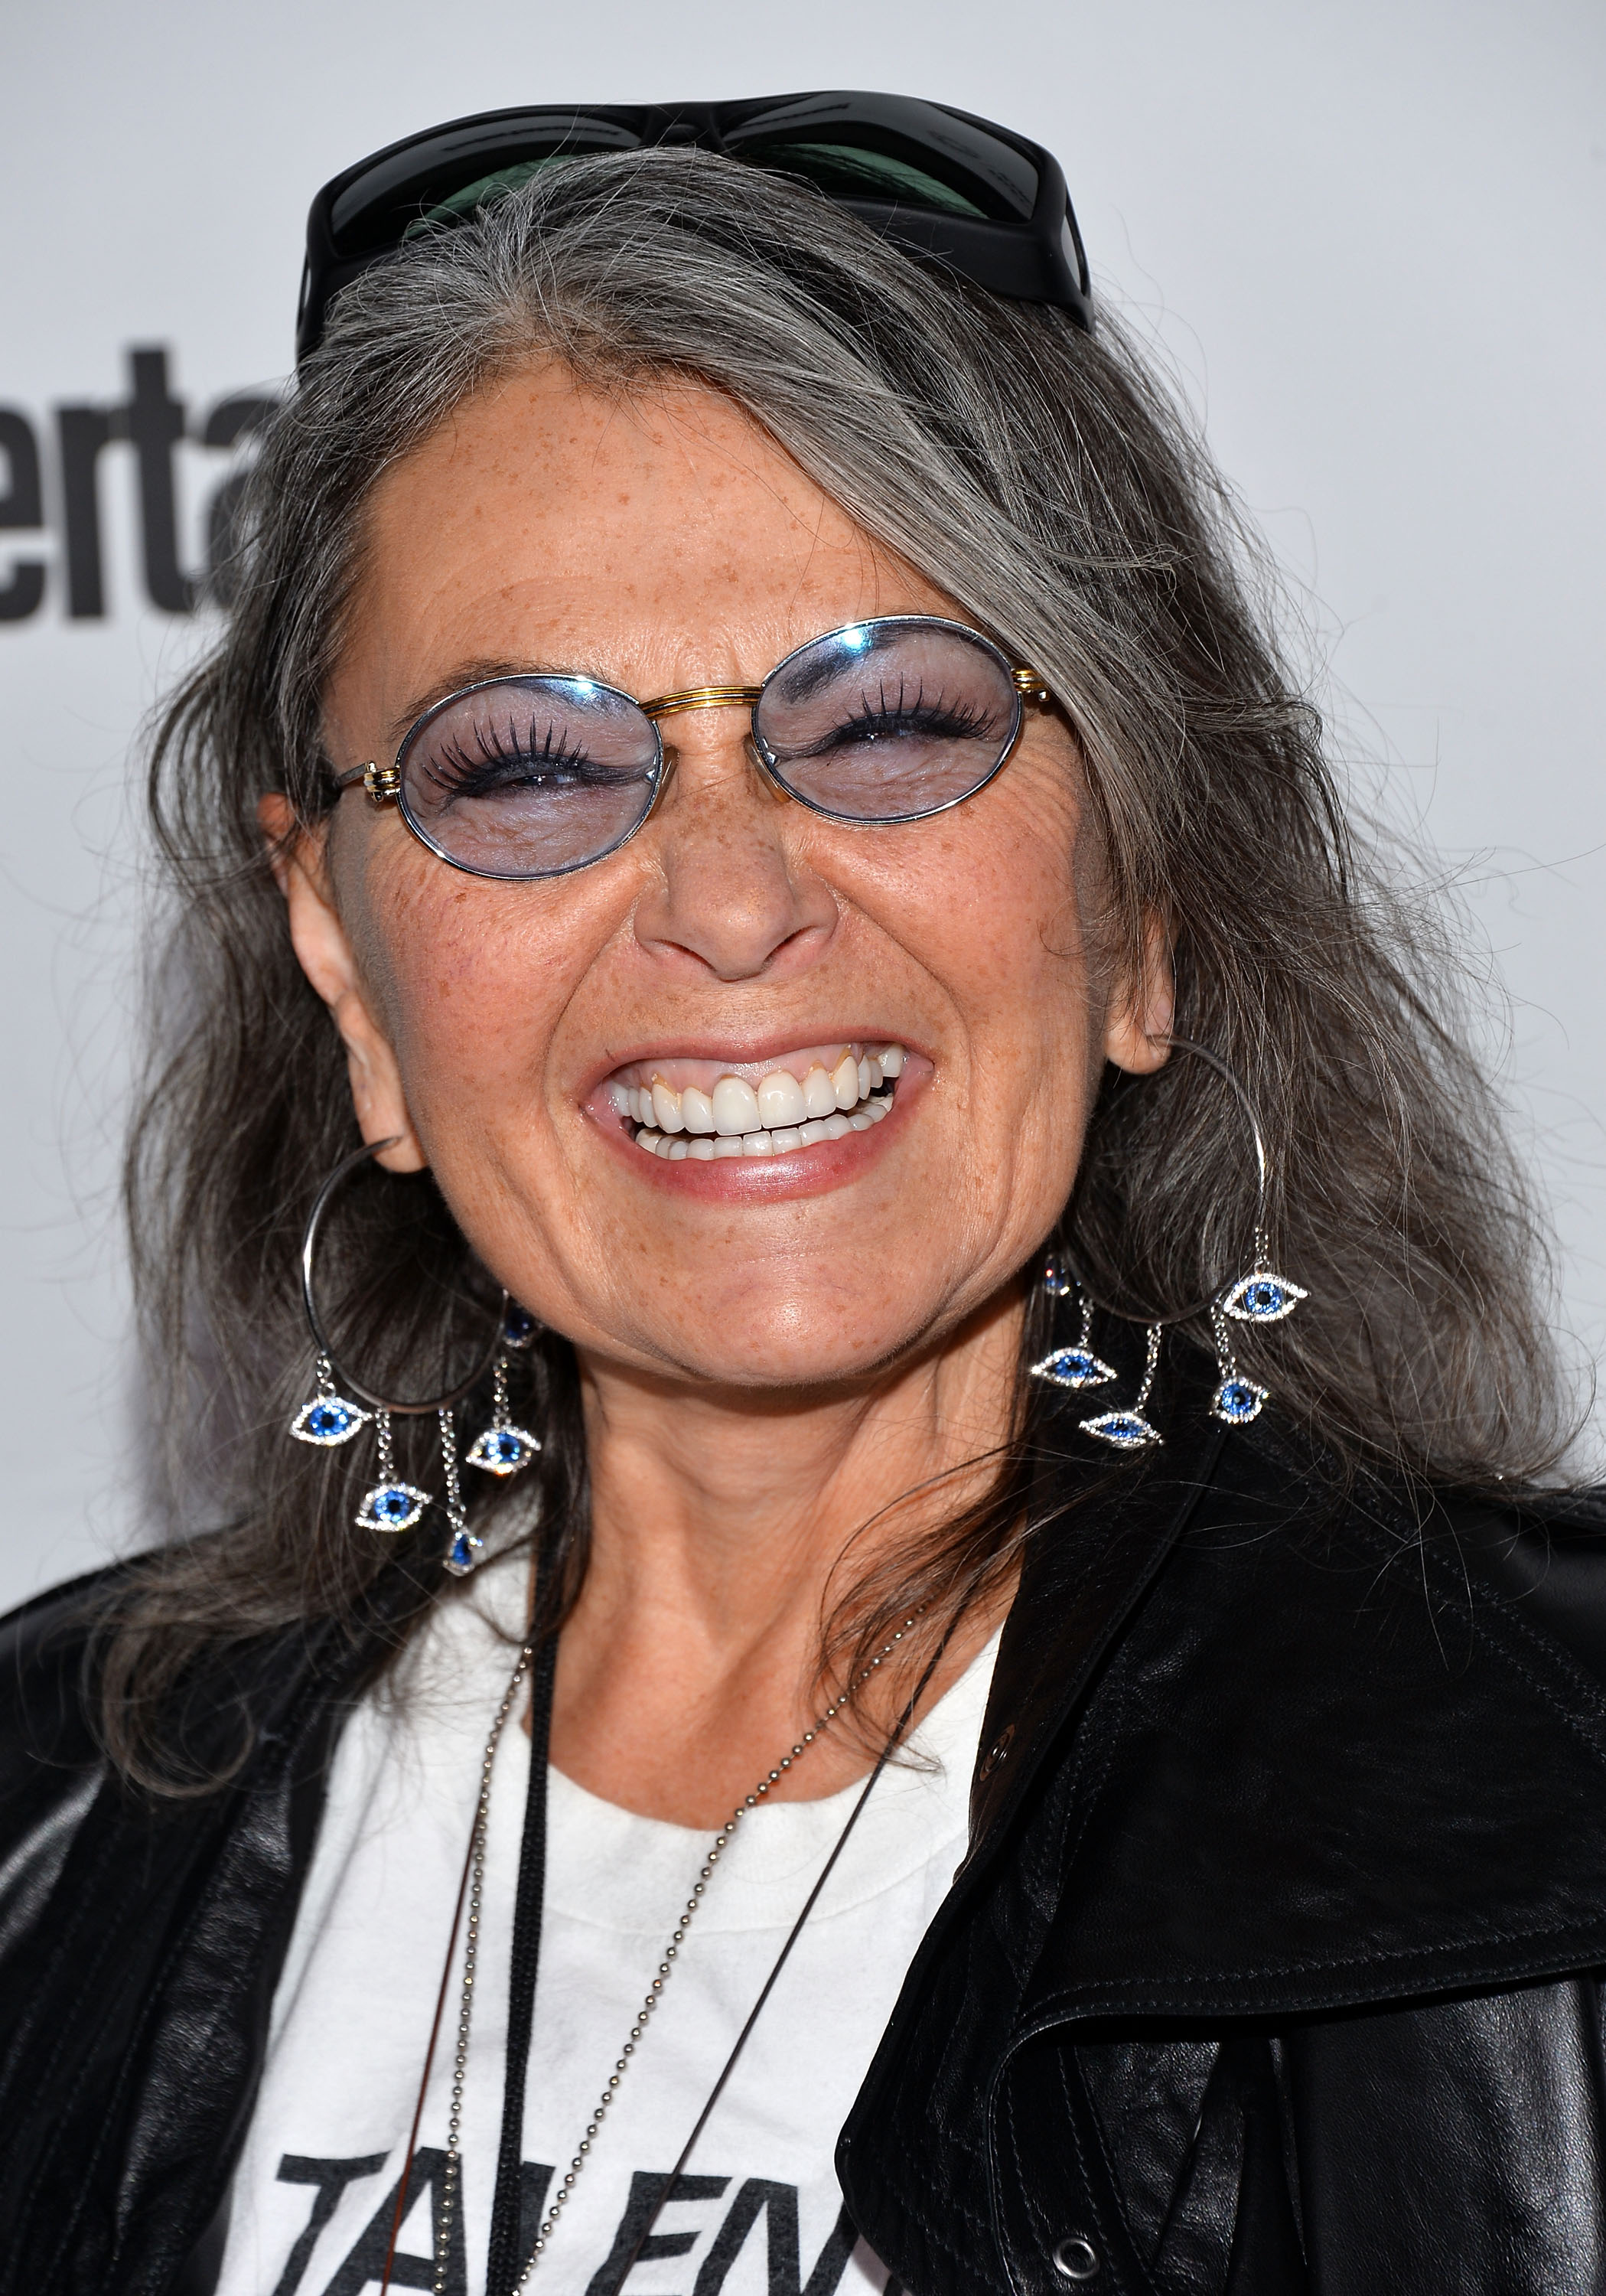 Actress Roseanne Barr arrives at The Paley Center for Media on March 10, 2014 in Beverly Hills, California | Source: Getty Images